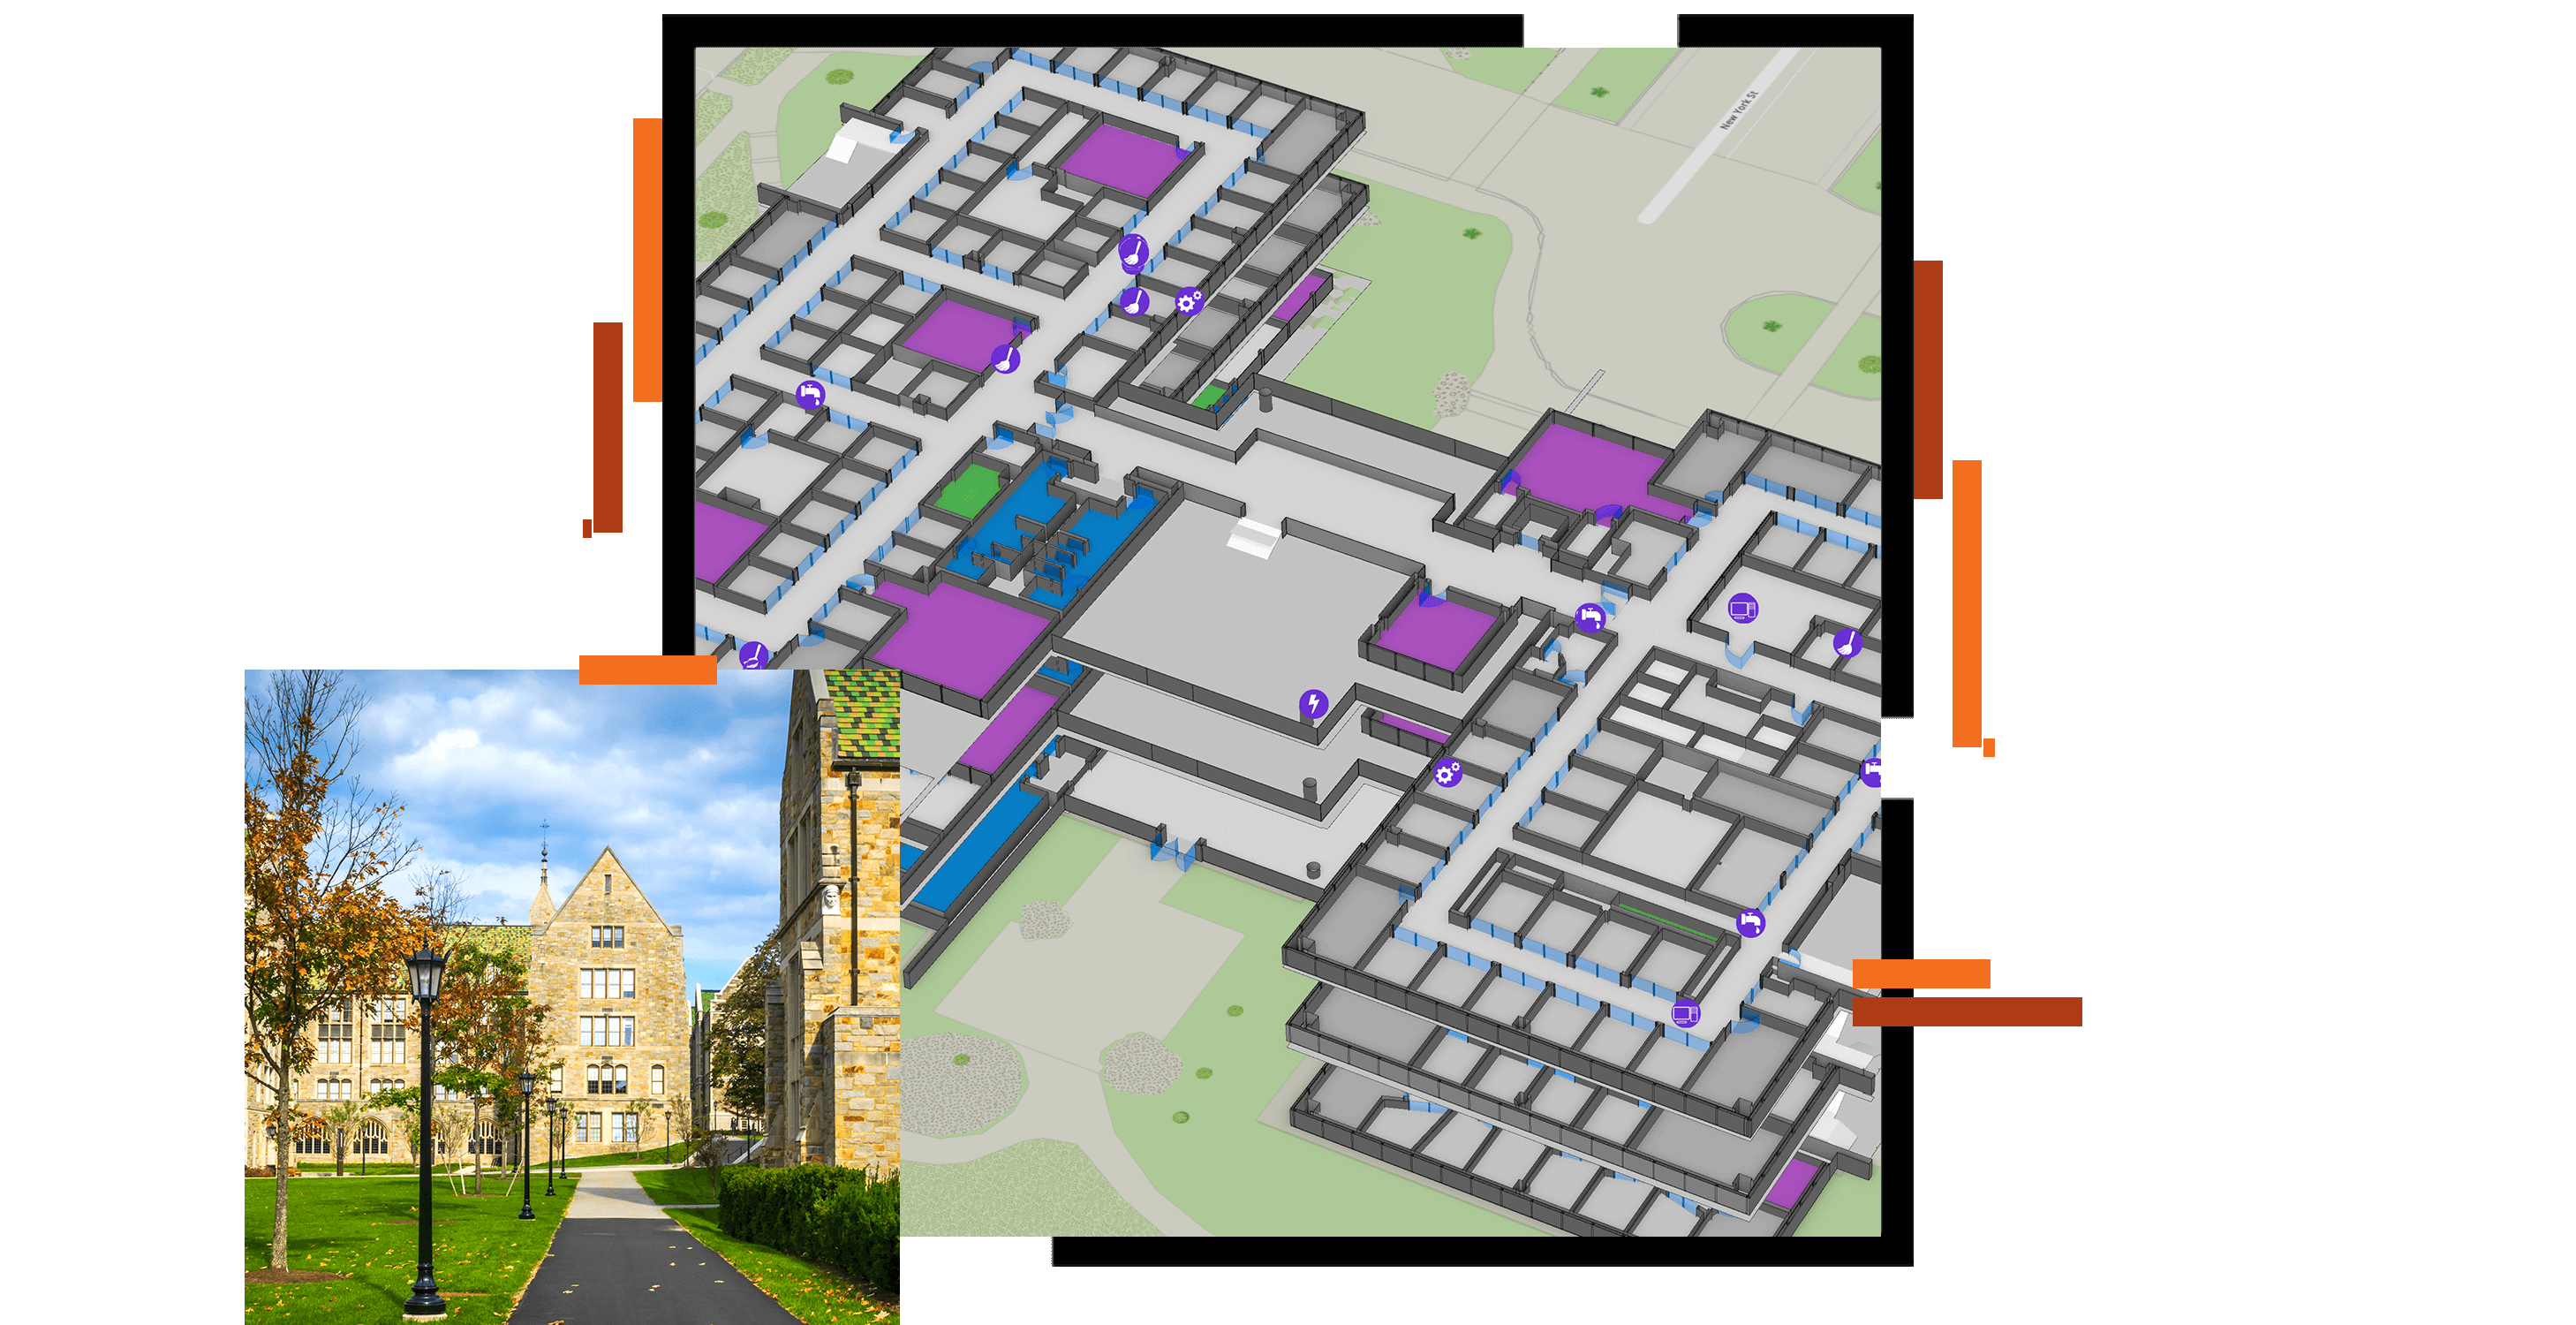 A map visualizing indoor data for a large, multistory building overlaid with an image of a walking path surrounded by grass, light posts, and old stone buildings